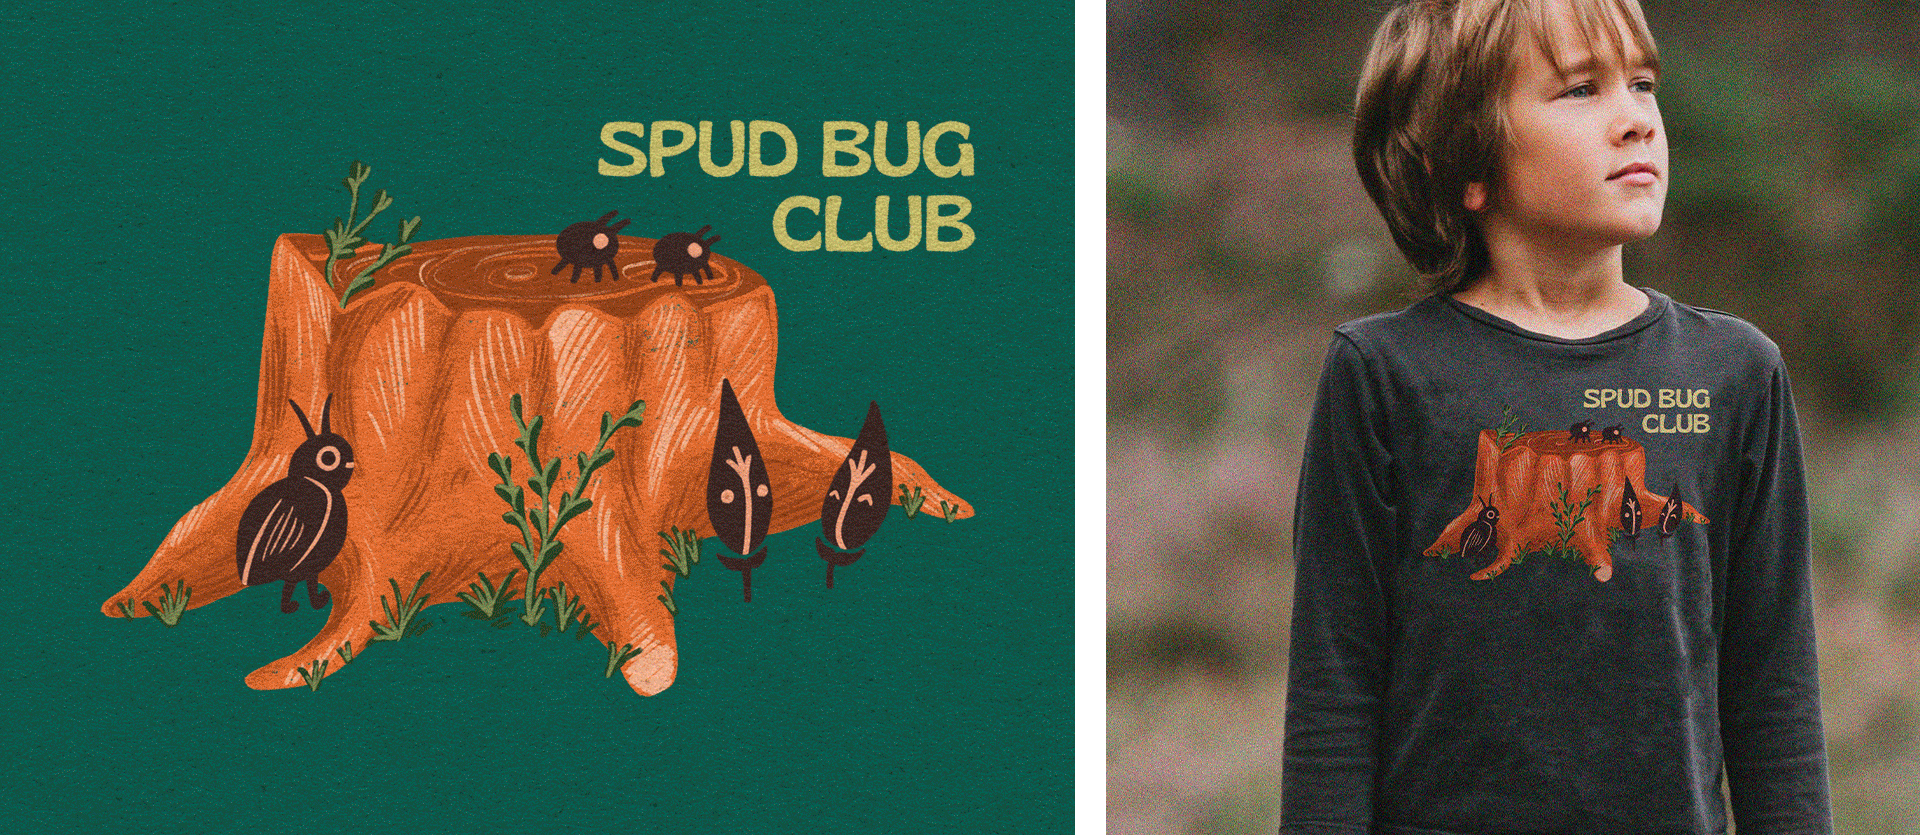 Illustration featuring a stump and bug like creatures with the words, Spud Bug Club, to the right a young boy wearing a shirt with graphic printed.